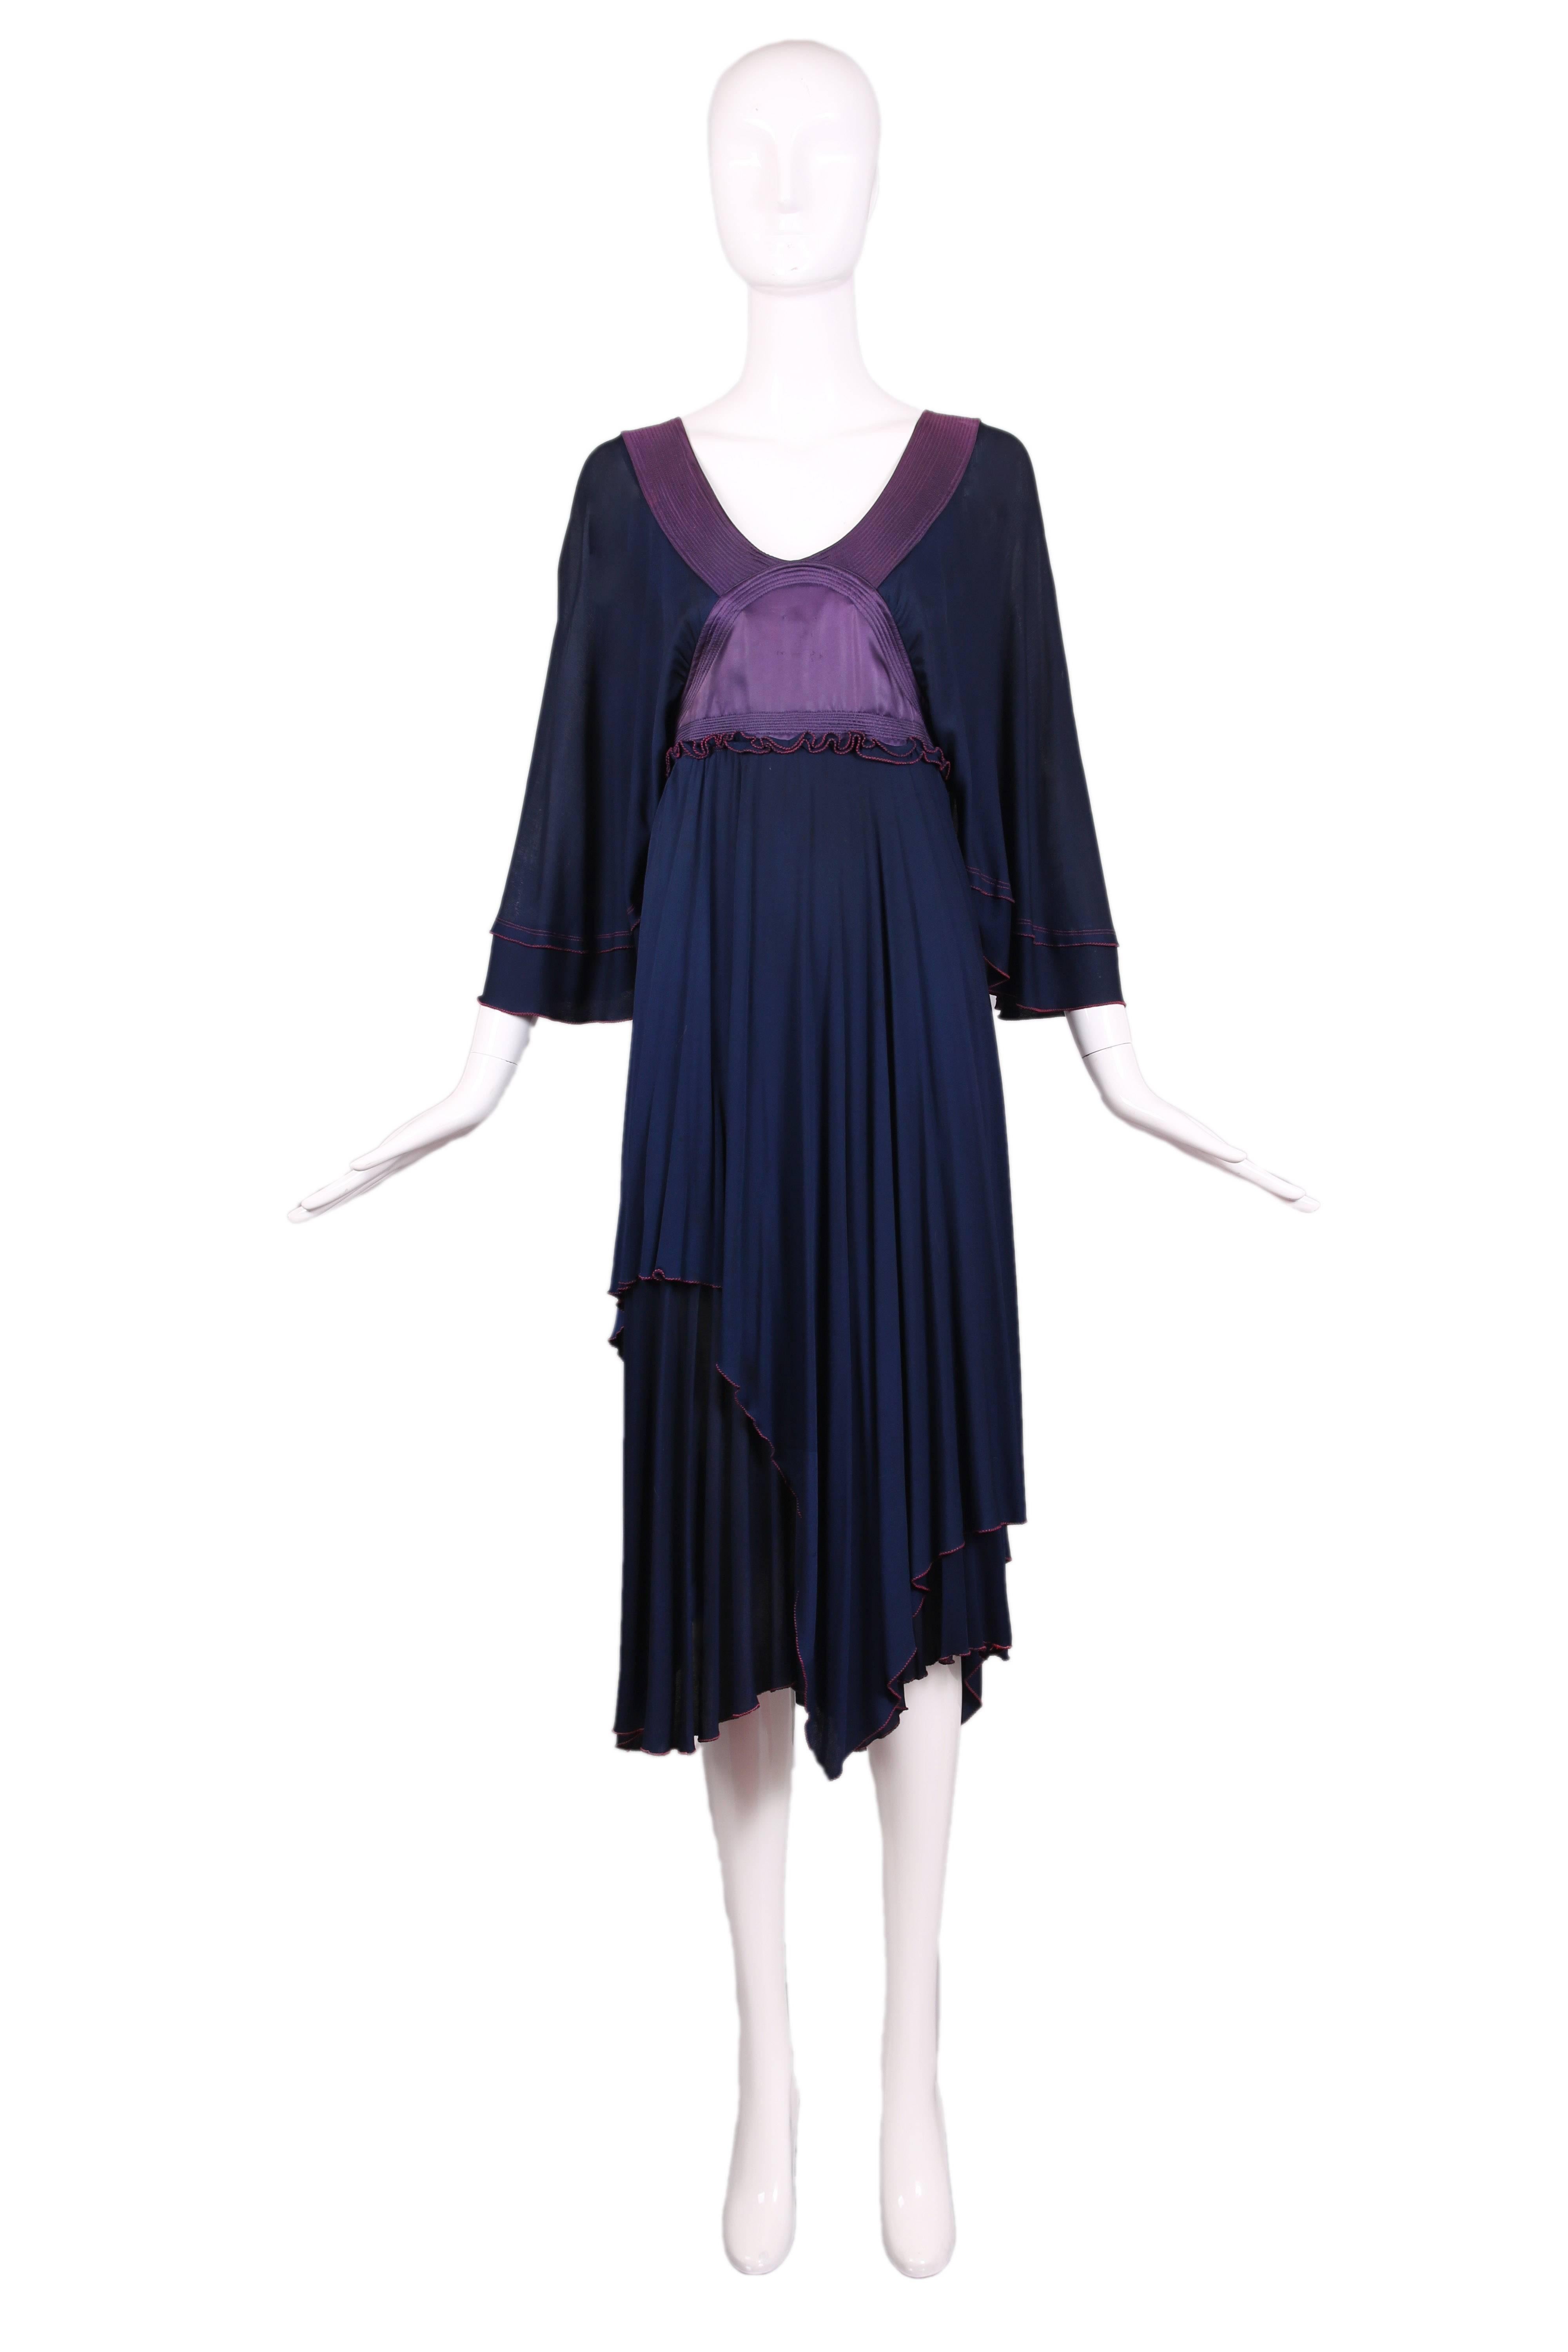 Vintage Zandra Rhodes navy and purple empire waist dress with bat wing sleeves and a wide scoop neck with quilted silk band. Multi-layered rough-cut hemline and lettuce edge with fabric button closures up the side. In good condition with tiny